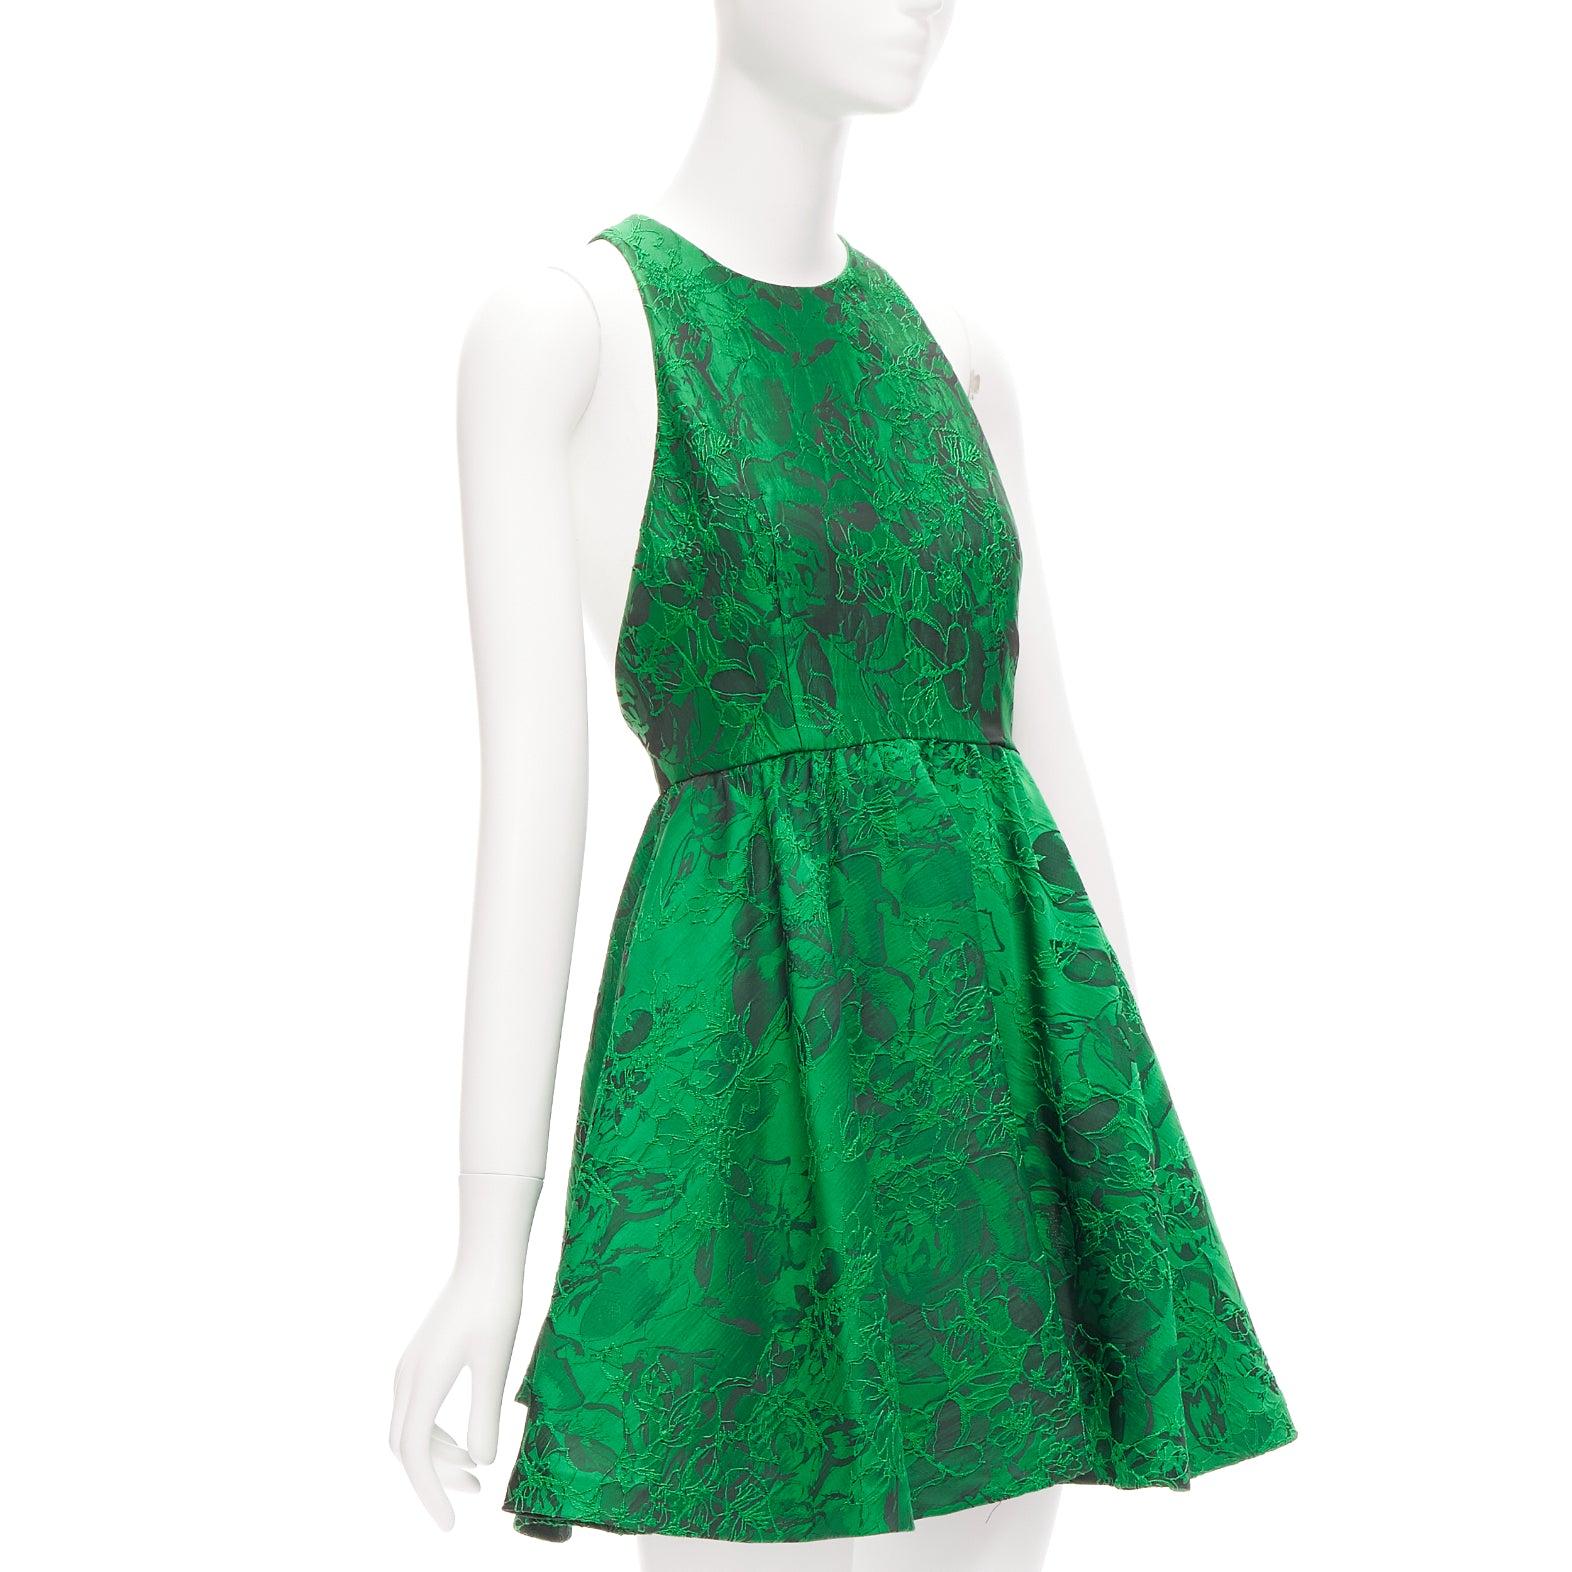 ALICE OLIVIA Tevin green lace jacquard sleeveless fit flared cocktail dress US0 XS
Reference: CELG/A00391
Brand: Alice Olivia
Model: Tevin
As seen on: Lyndsy Fonseca
Material: Polyester
Color: Green
Pattern: Lace
Closure: Zip
Lining: Black